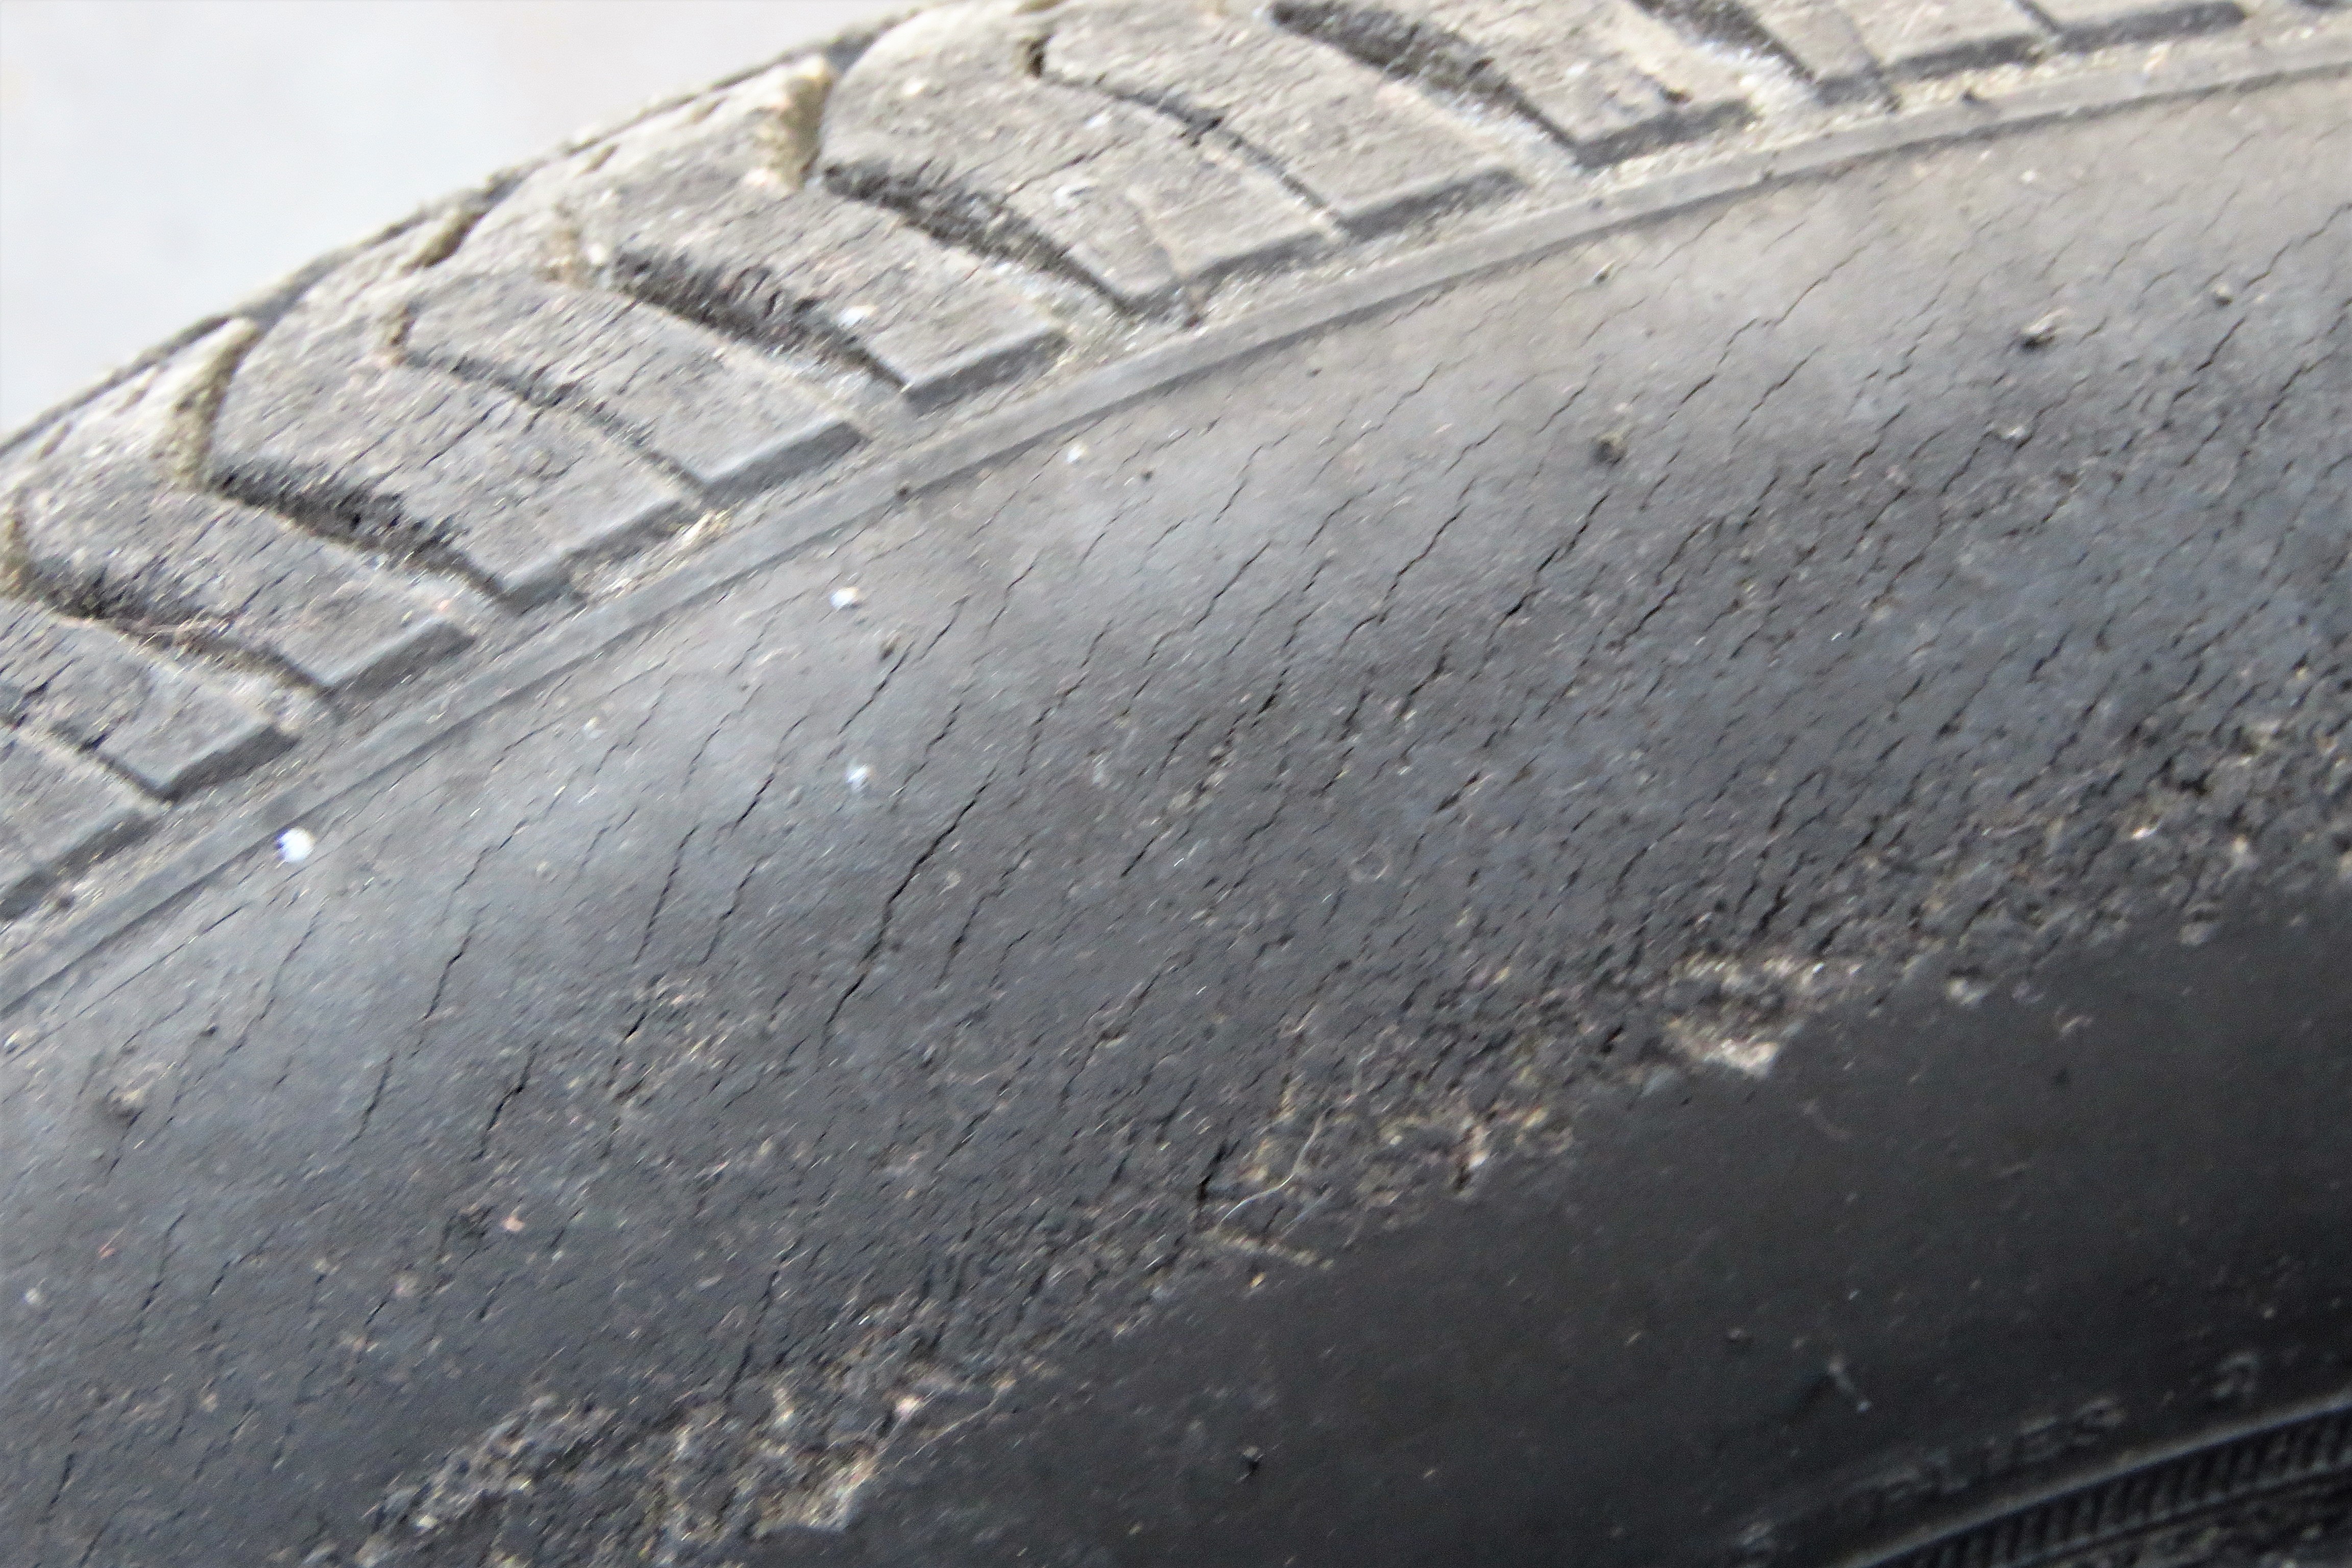 Tires, Your tires might look safe, but are they? Beware as the years go by, ClassicCars.com Journal